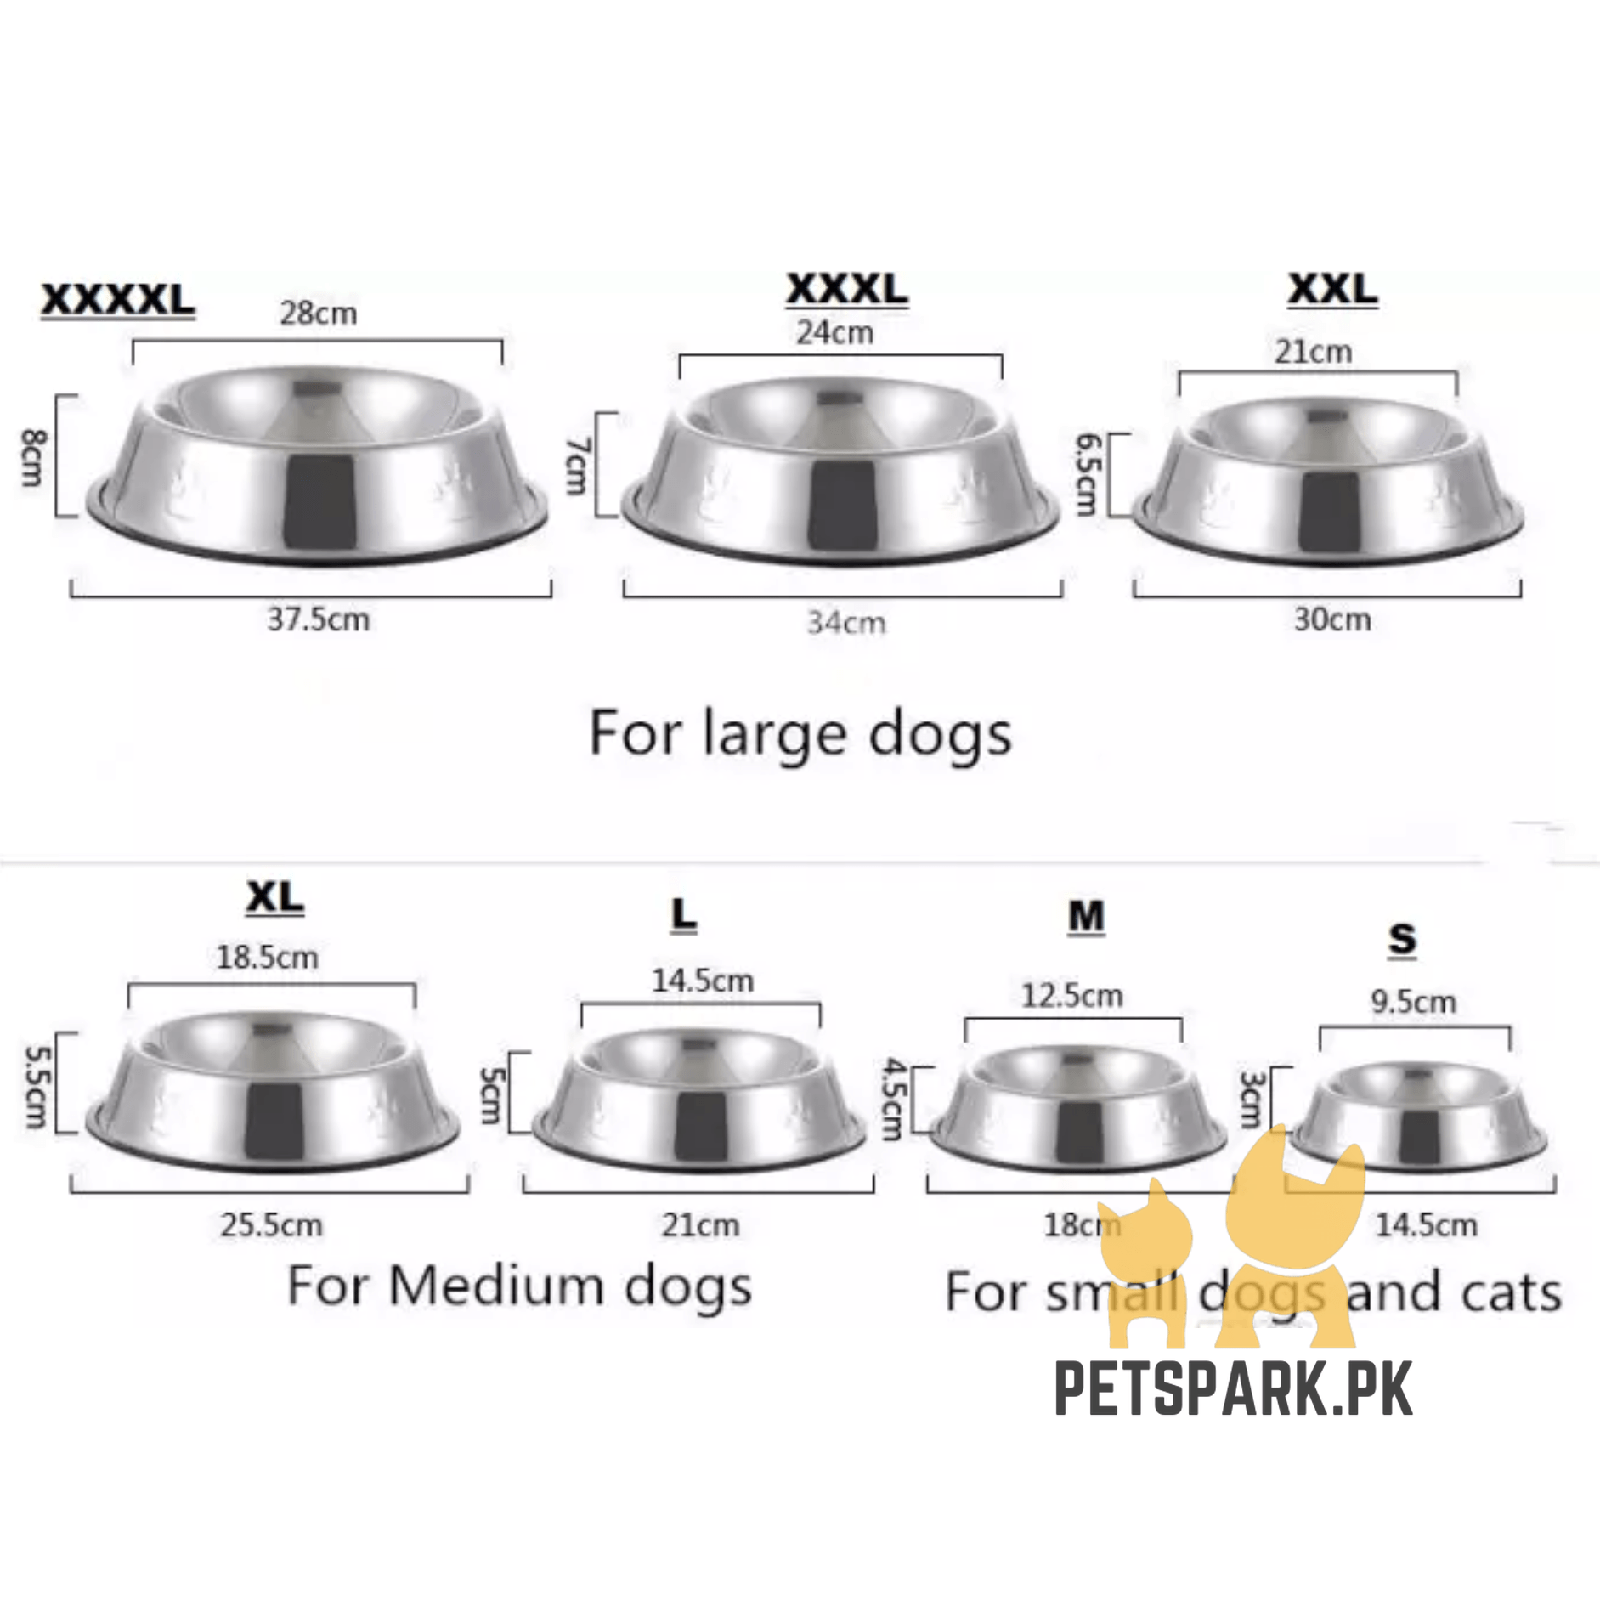 Stainless Steel Bowl for Cats and Dogs pets-park-pk